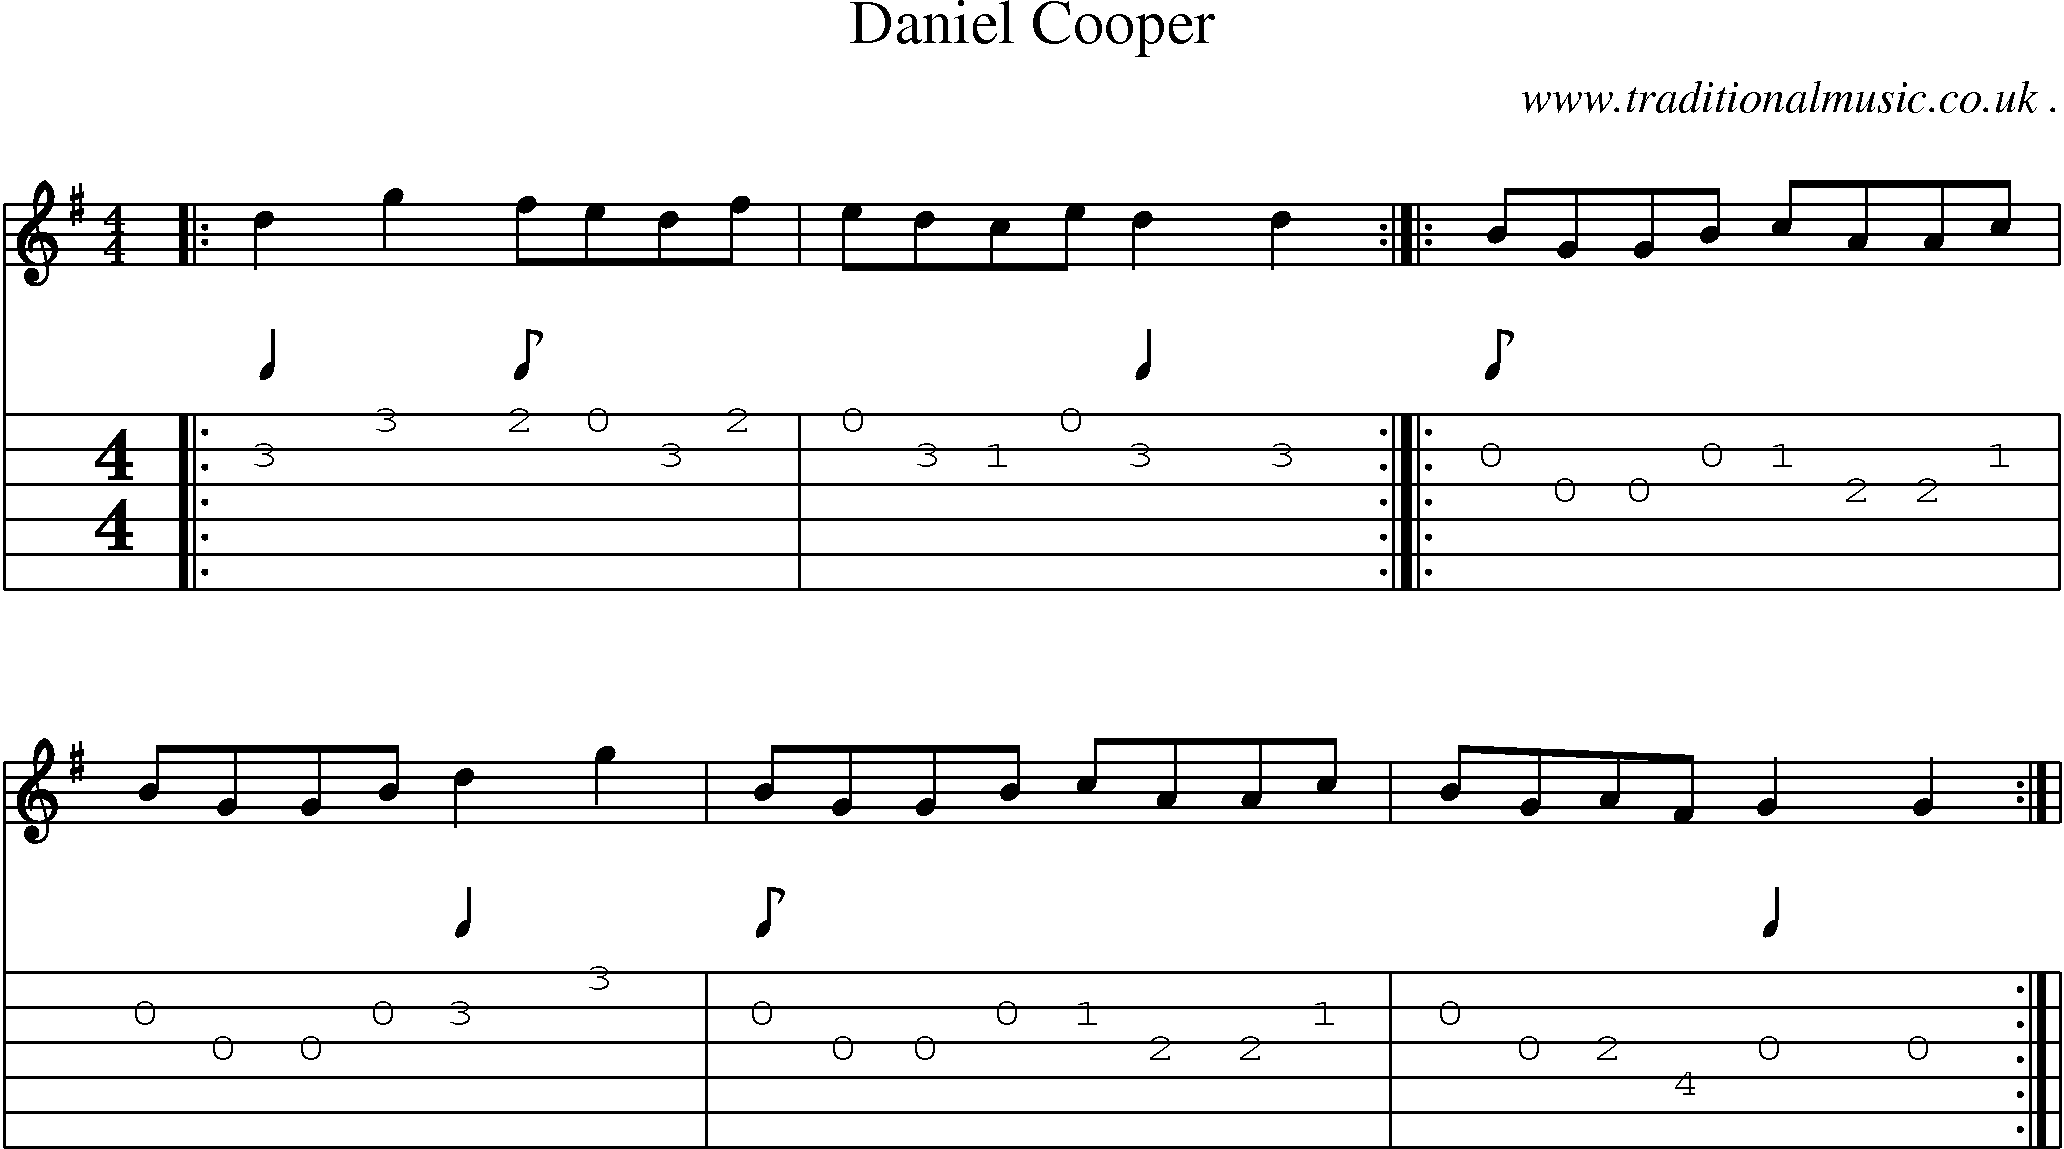 Sheet-Music and Guitar Tabs for Daniel Cooper